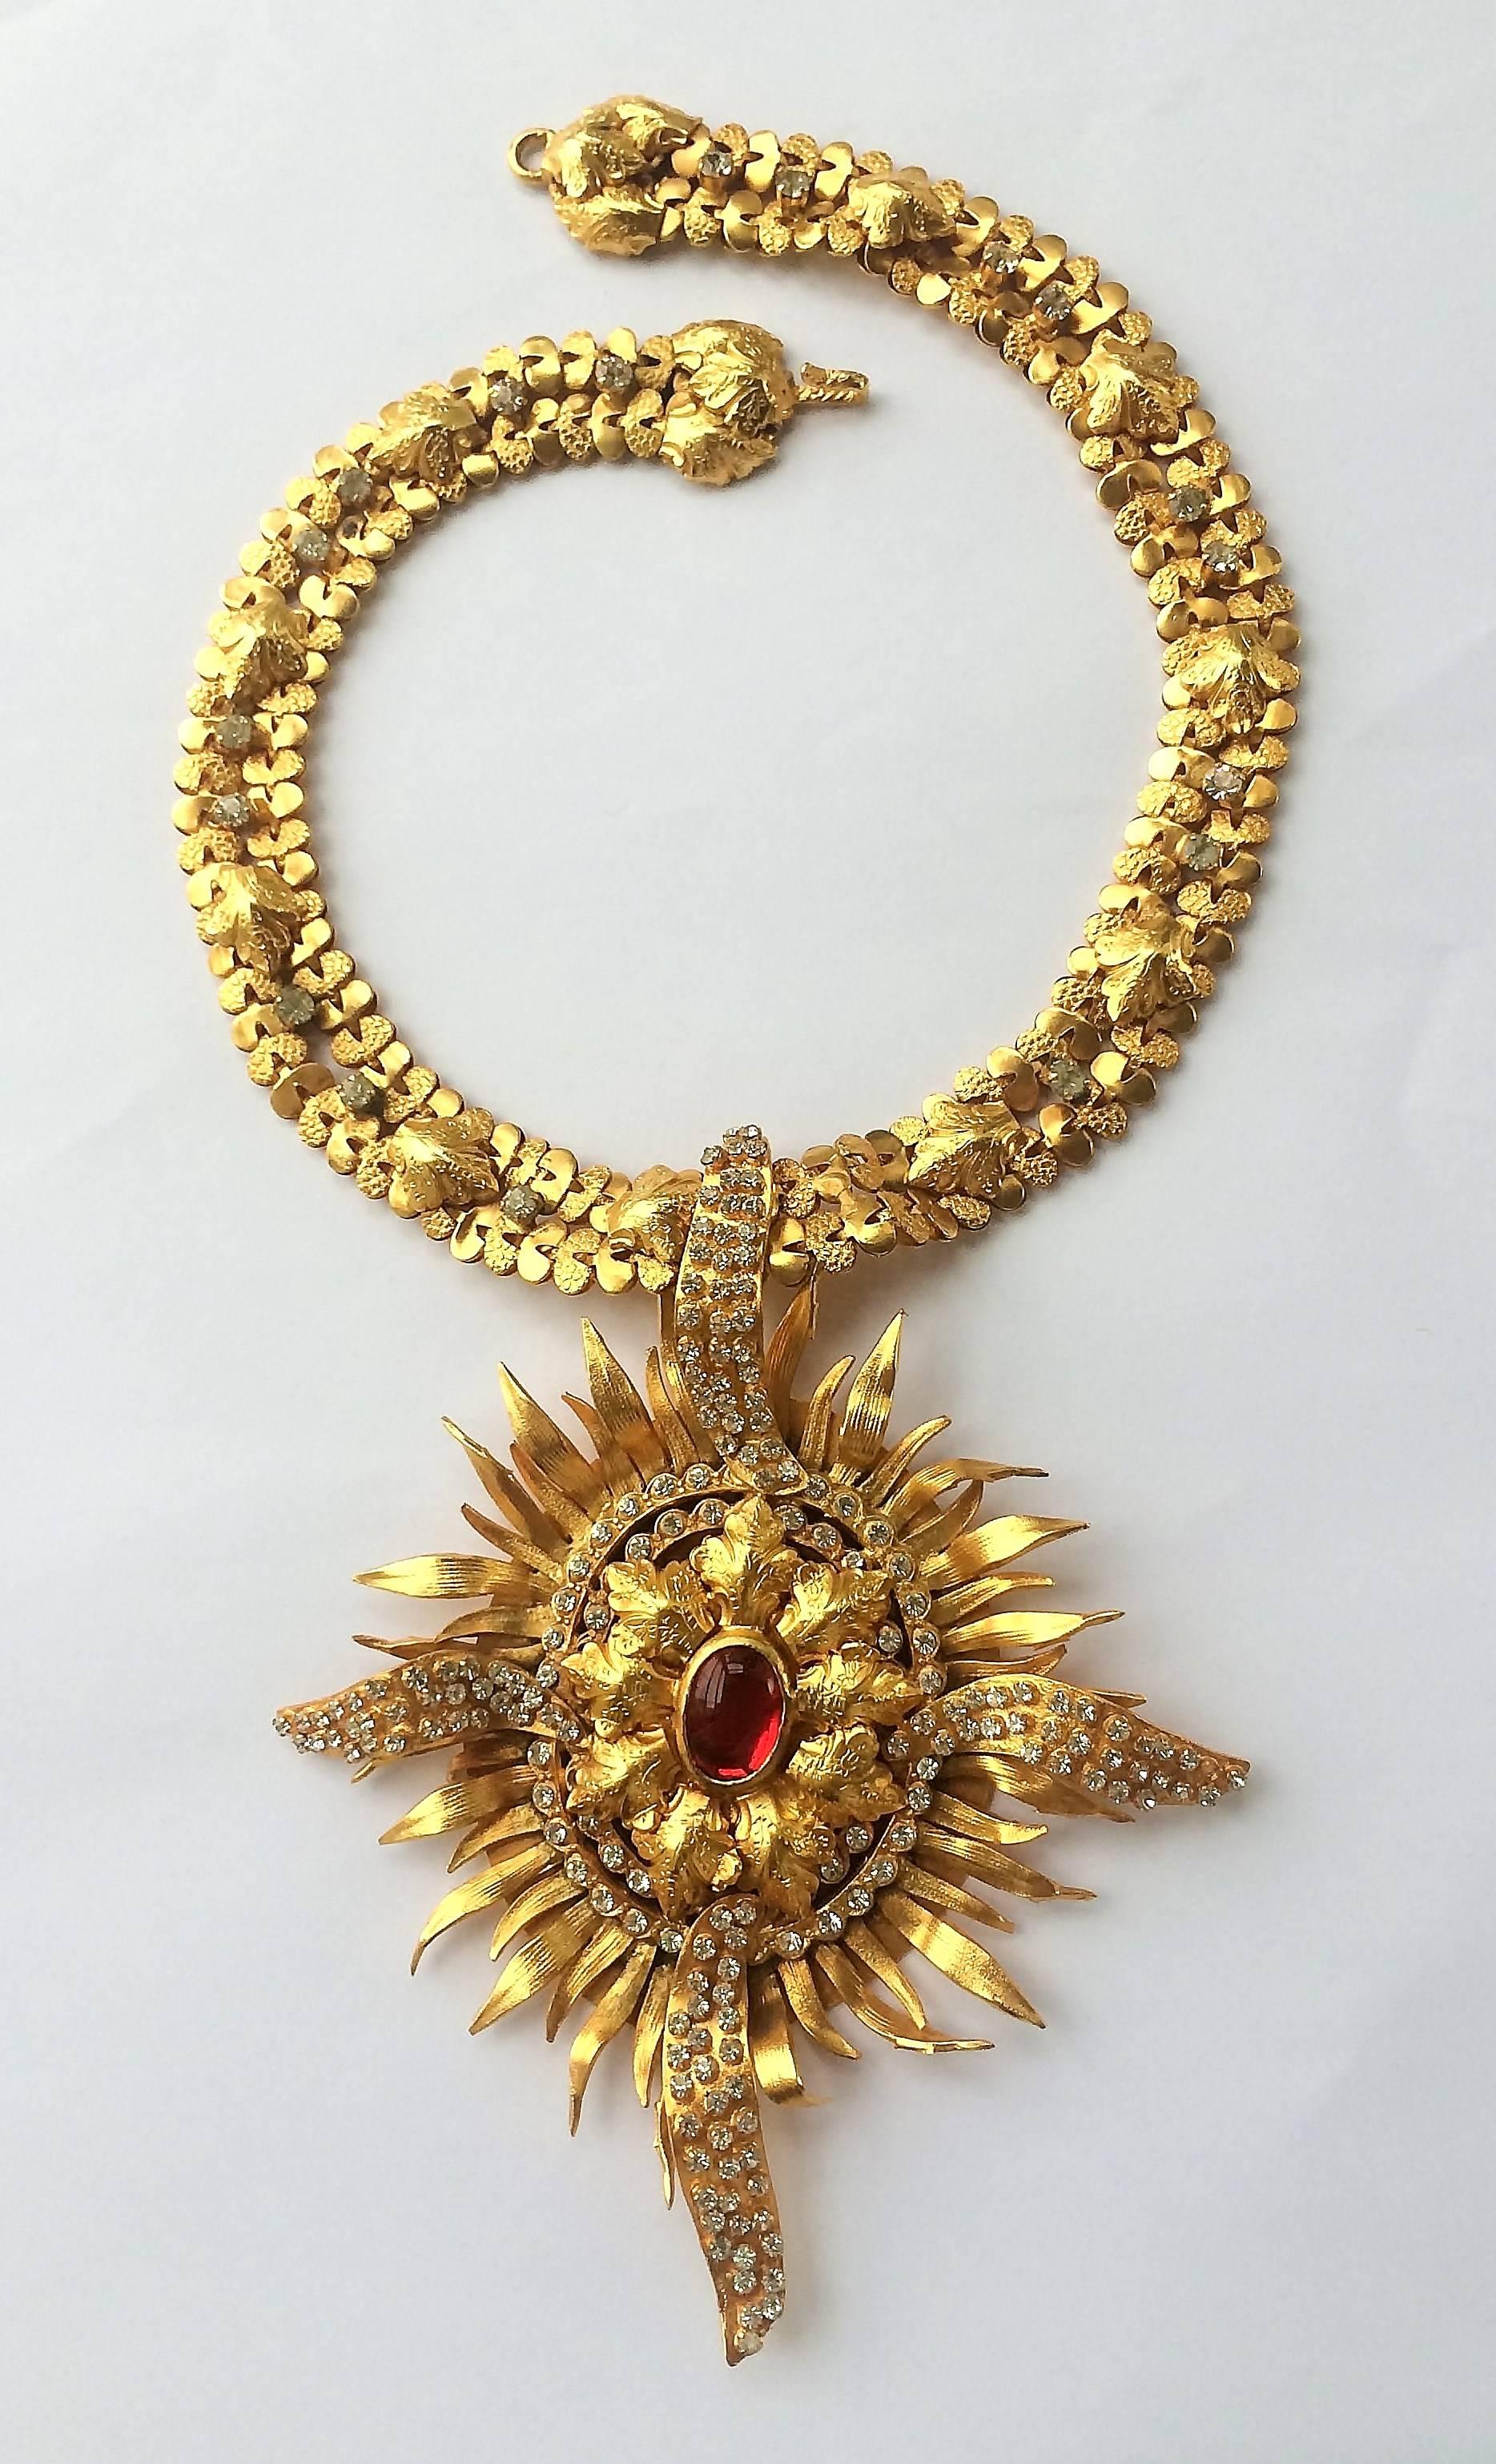 Baroque Exceptional gilt and paste starburst pendant necklace, c.1960s, attributed to CIS